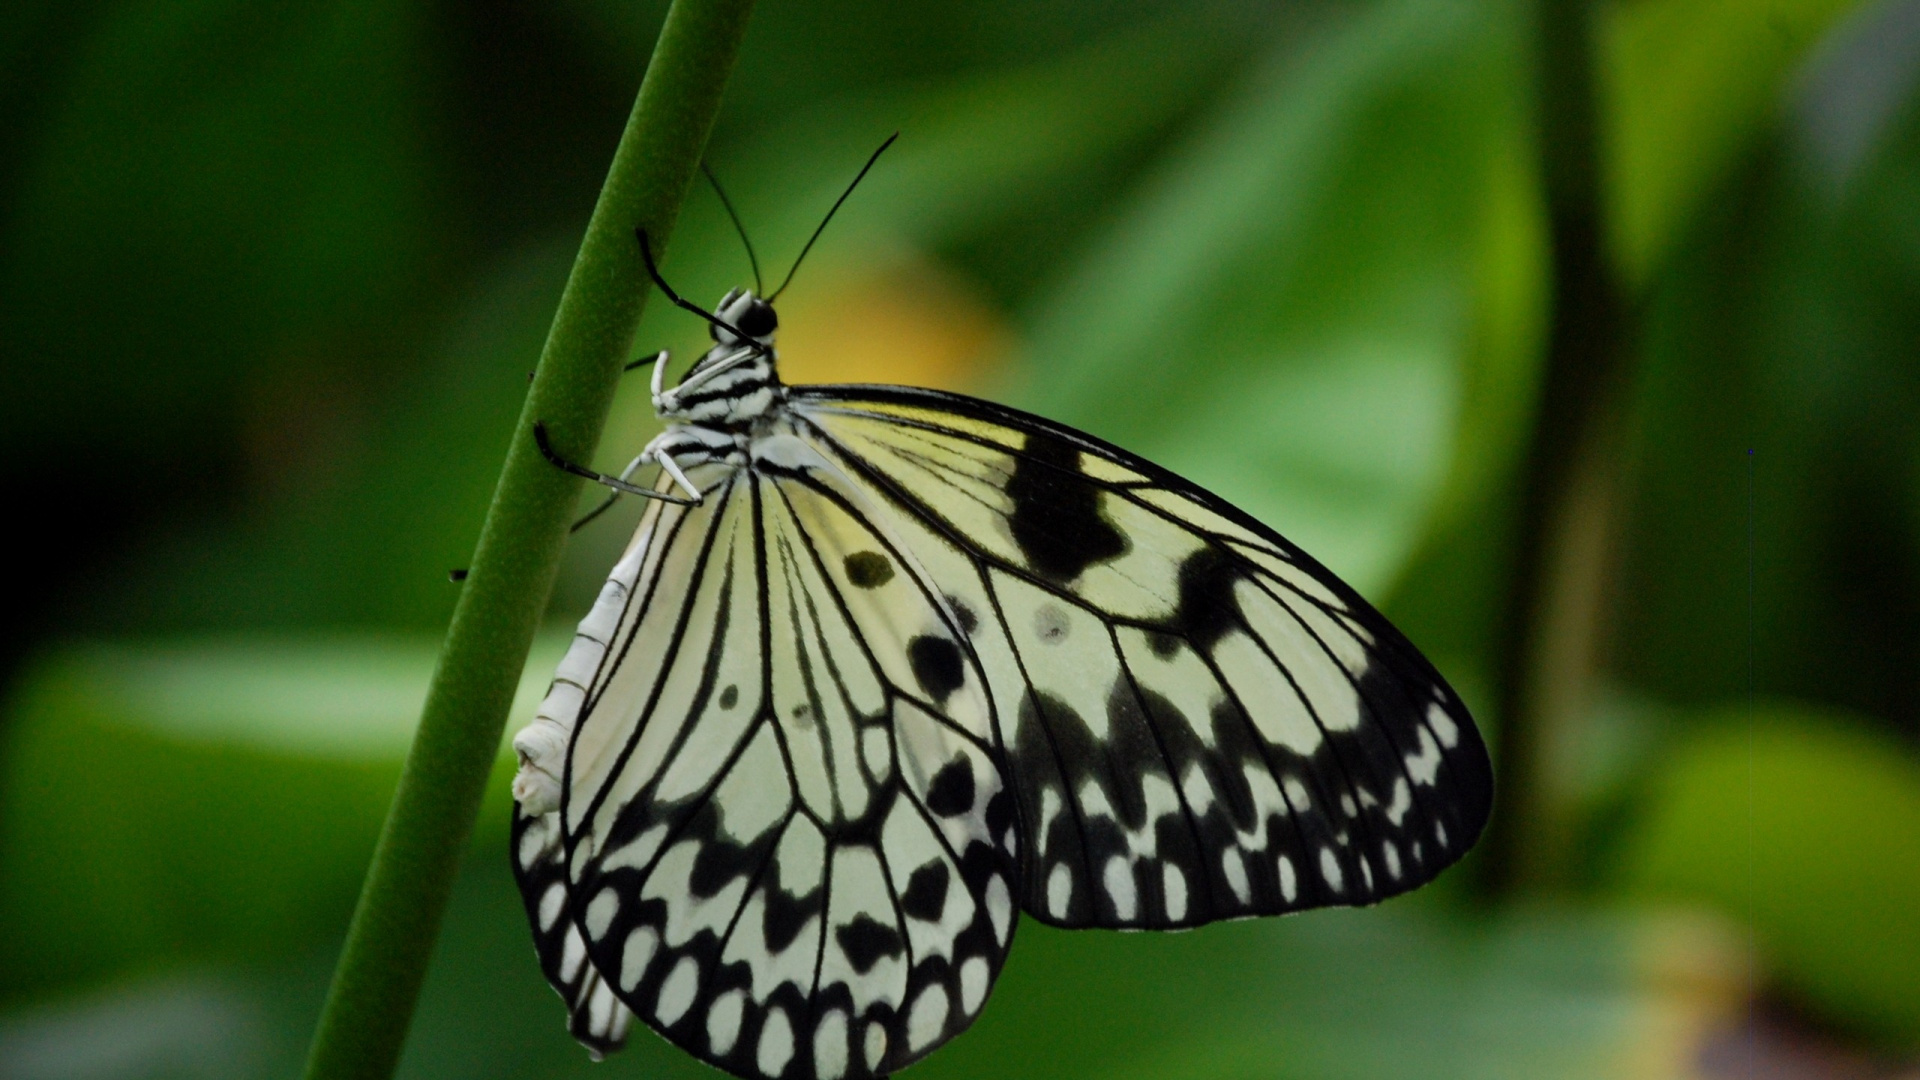 Black and White Butterfly Perched on Green Leaf in Close up Photography During Daytime. Wallpaper in 1920x1080 Resolution